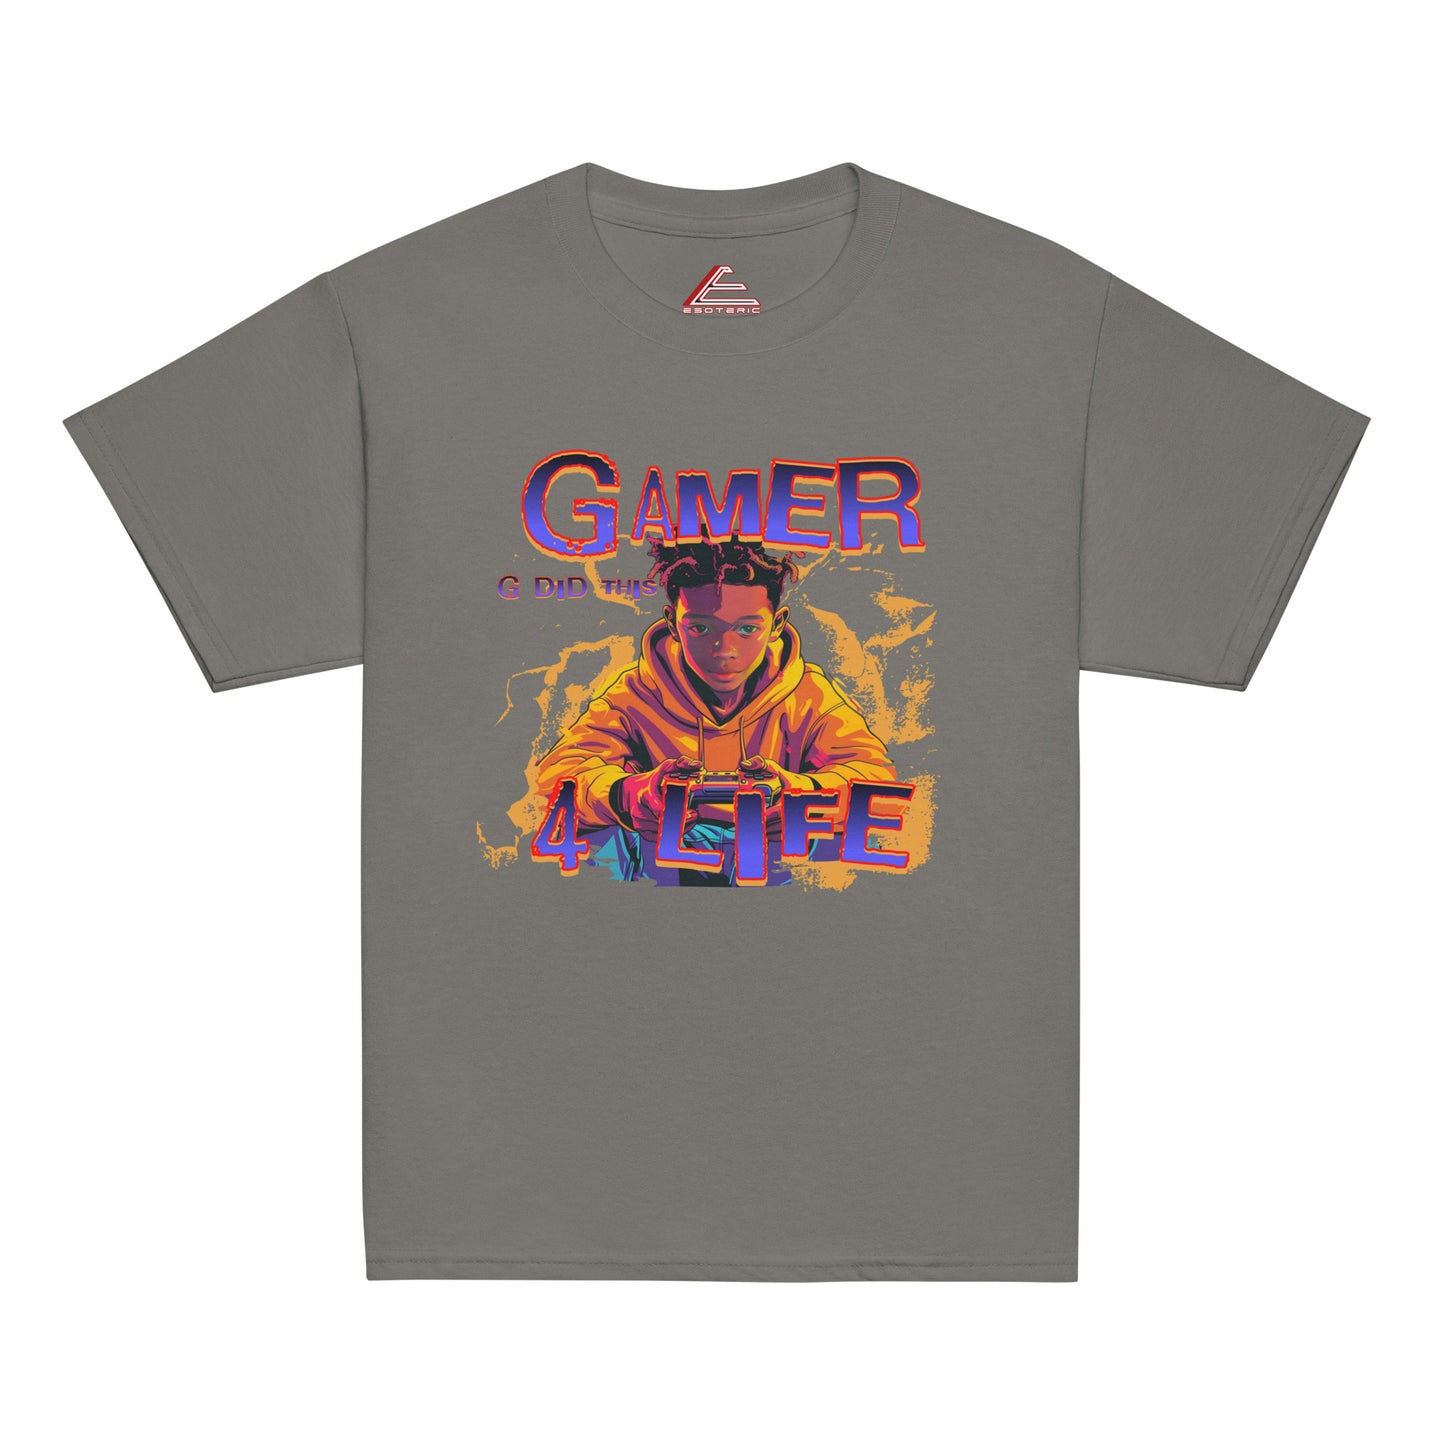 GAMER 4 LIFE Youth classic tee